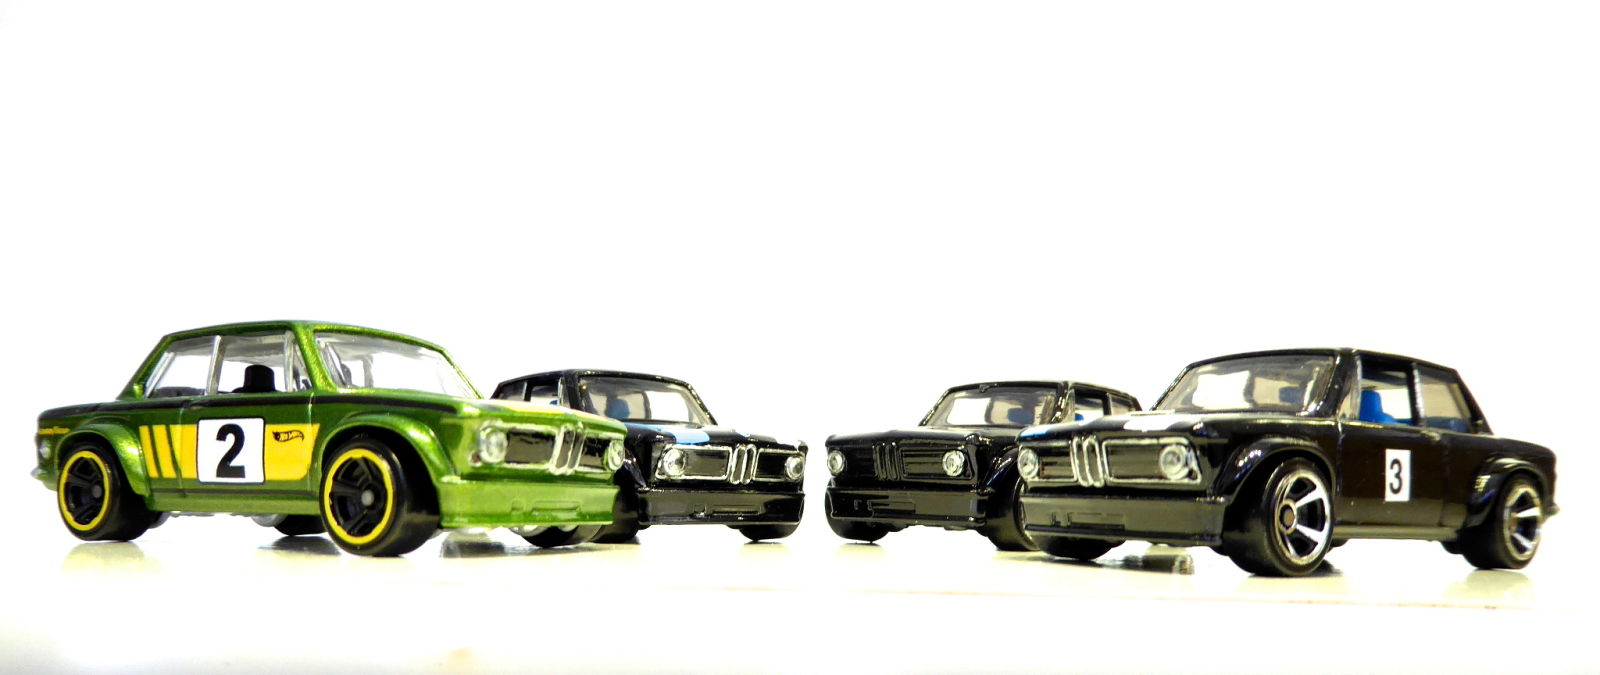 Illustration for article titled LaLD ///May BMW Day 5: Lining up for a race